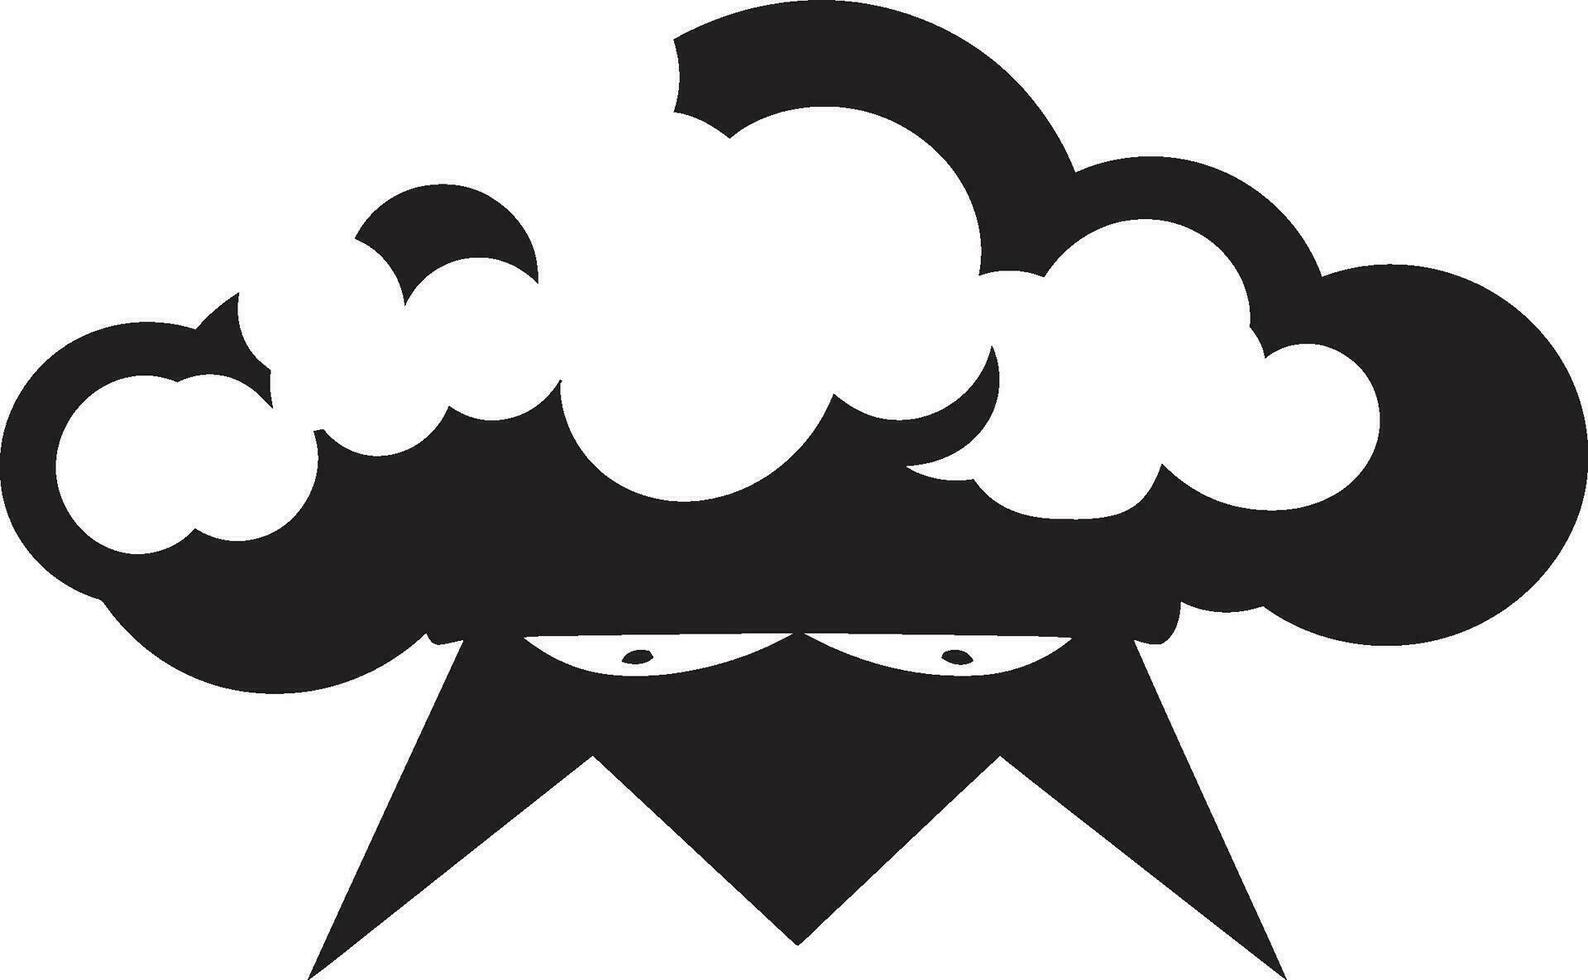 Brooding Thunderstorm Vector Angry Cloud Design Thunderous Squall Black Cartoon Cloud Icon